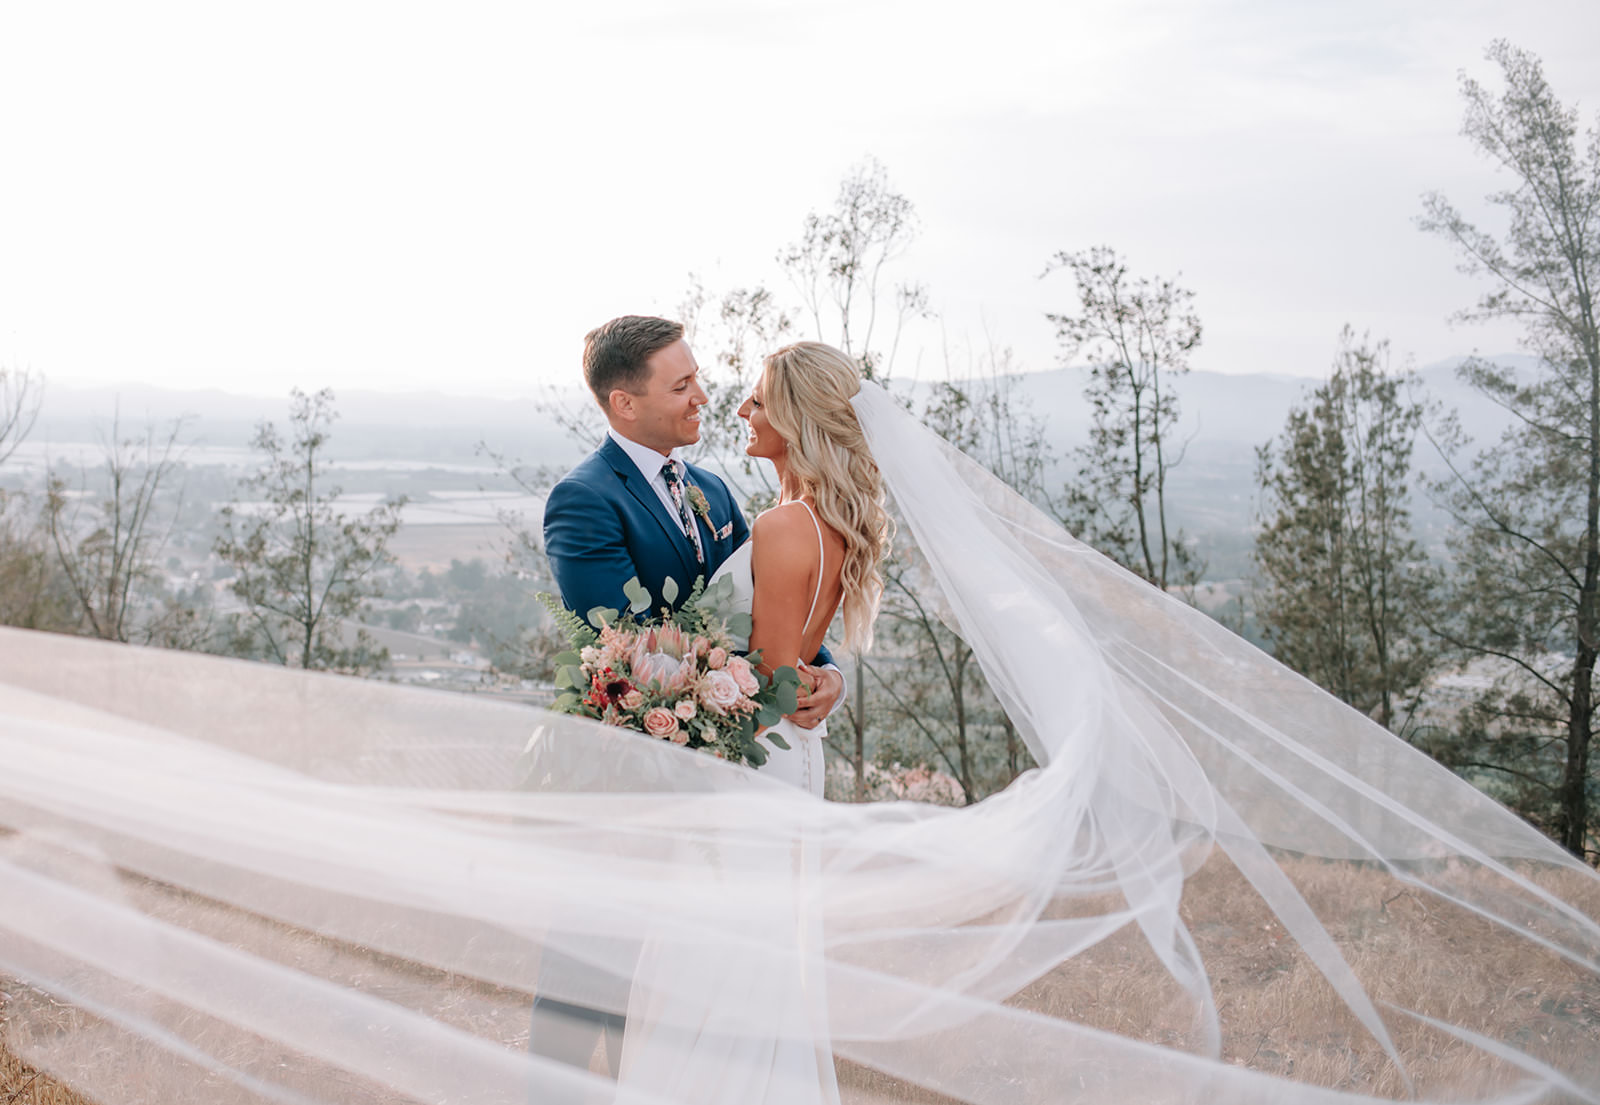 California backyard wedding couple kissing with mountains in the background with veil floating around